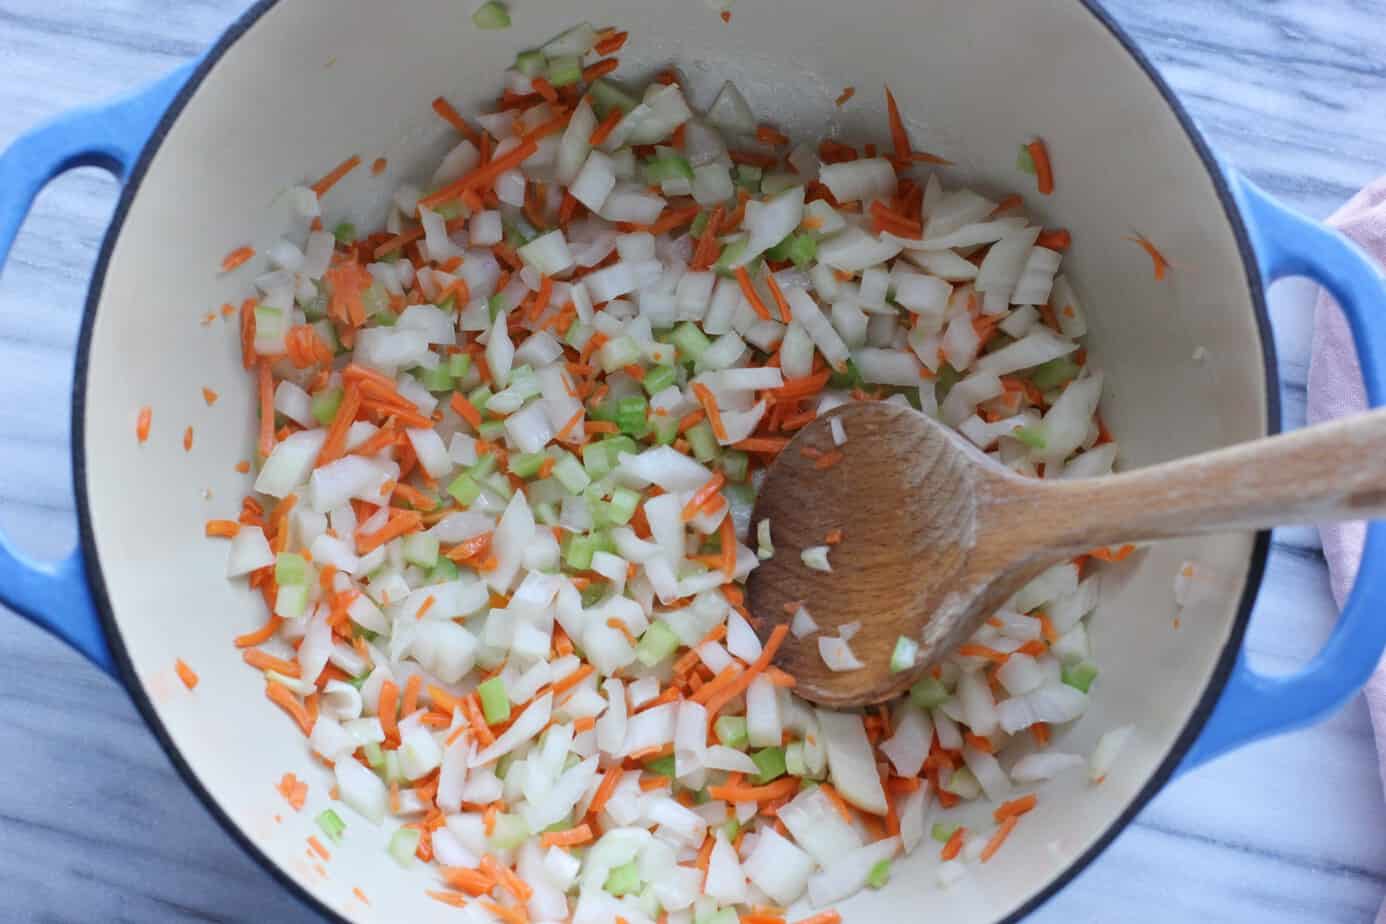 chopped celery, onion and carrot